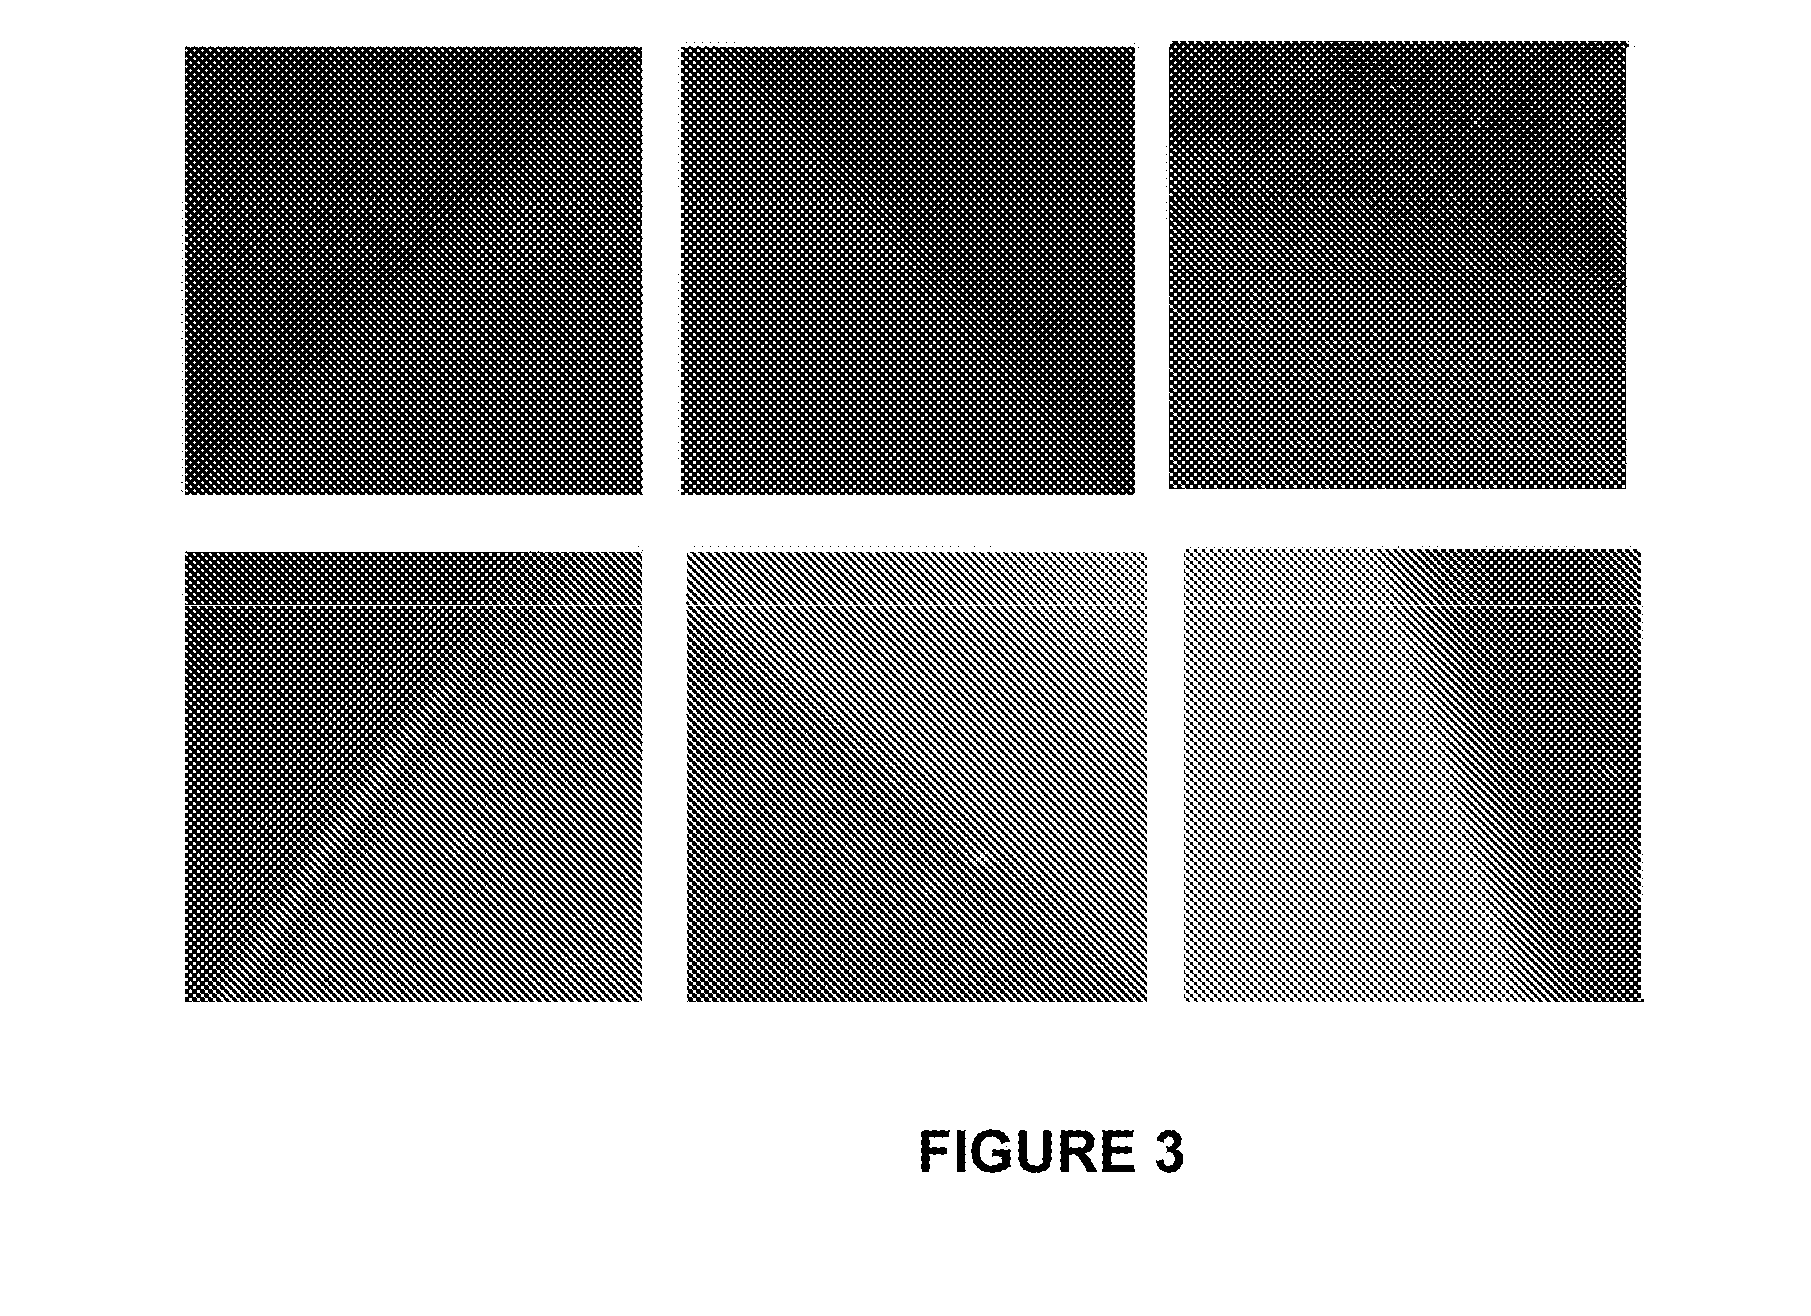 Functionalization of a substrate system and method